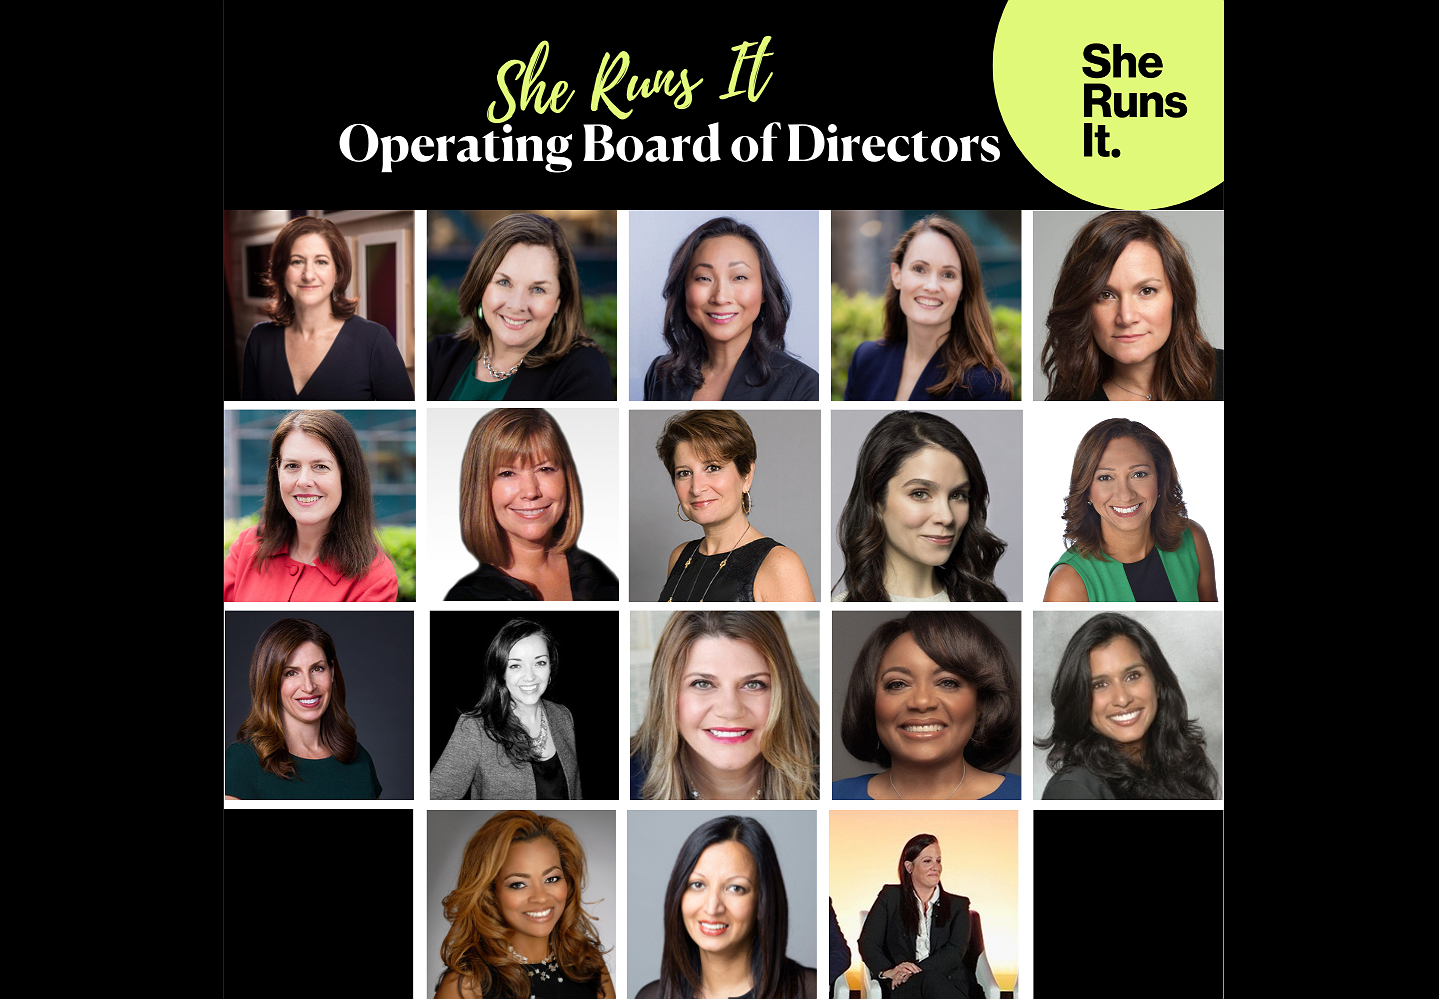 She Runs It: Expanding Into the New Normal